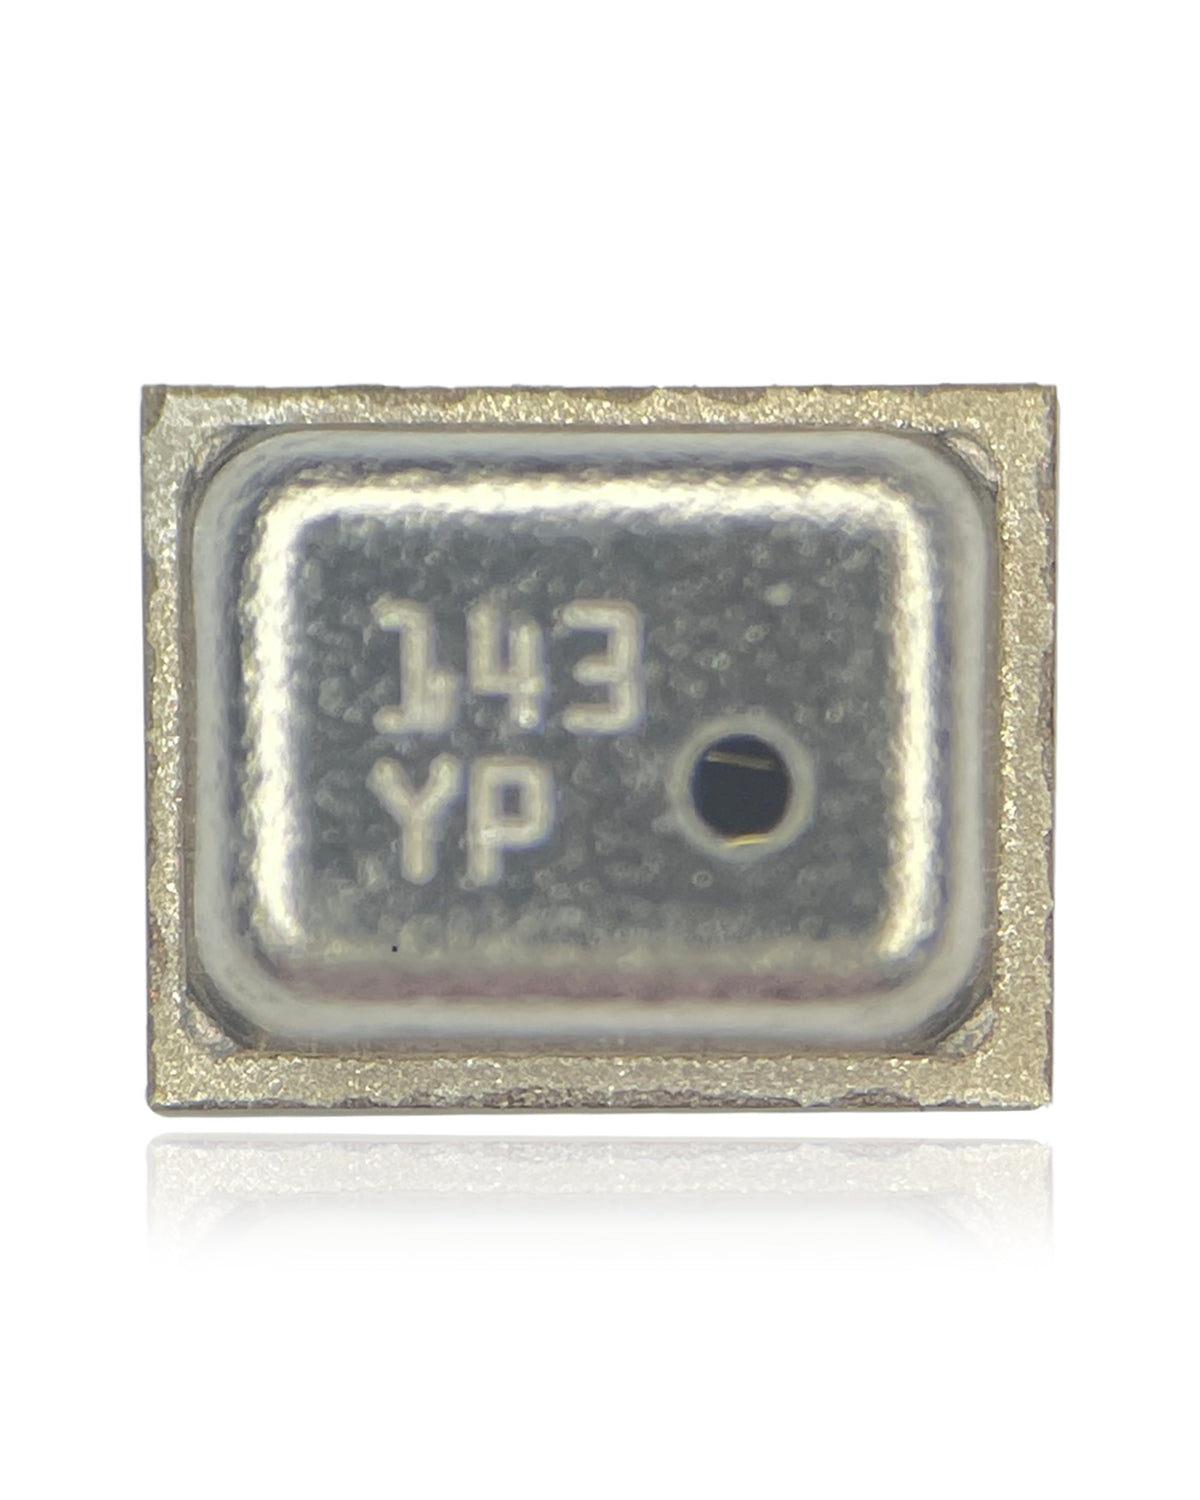 PRESSURE IC COMPATIBLE WITH IPHONE 6 / 6 PLUS (U2204: BMP282AC: BMP282: 8 PINS)